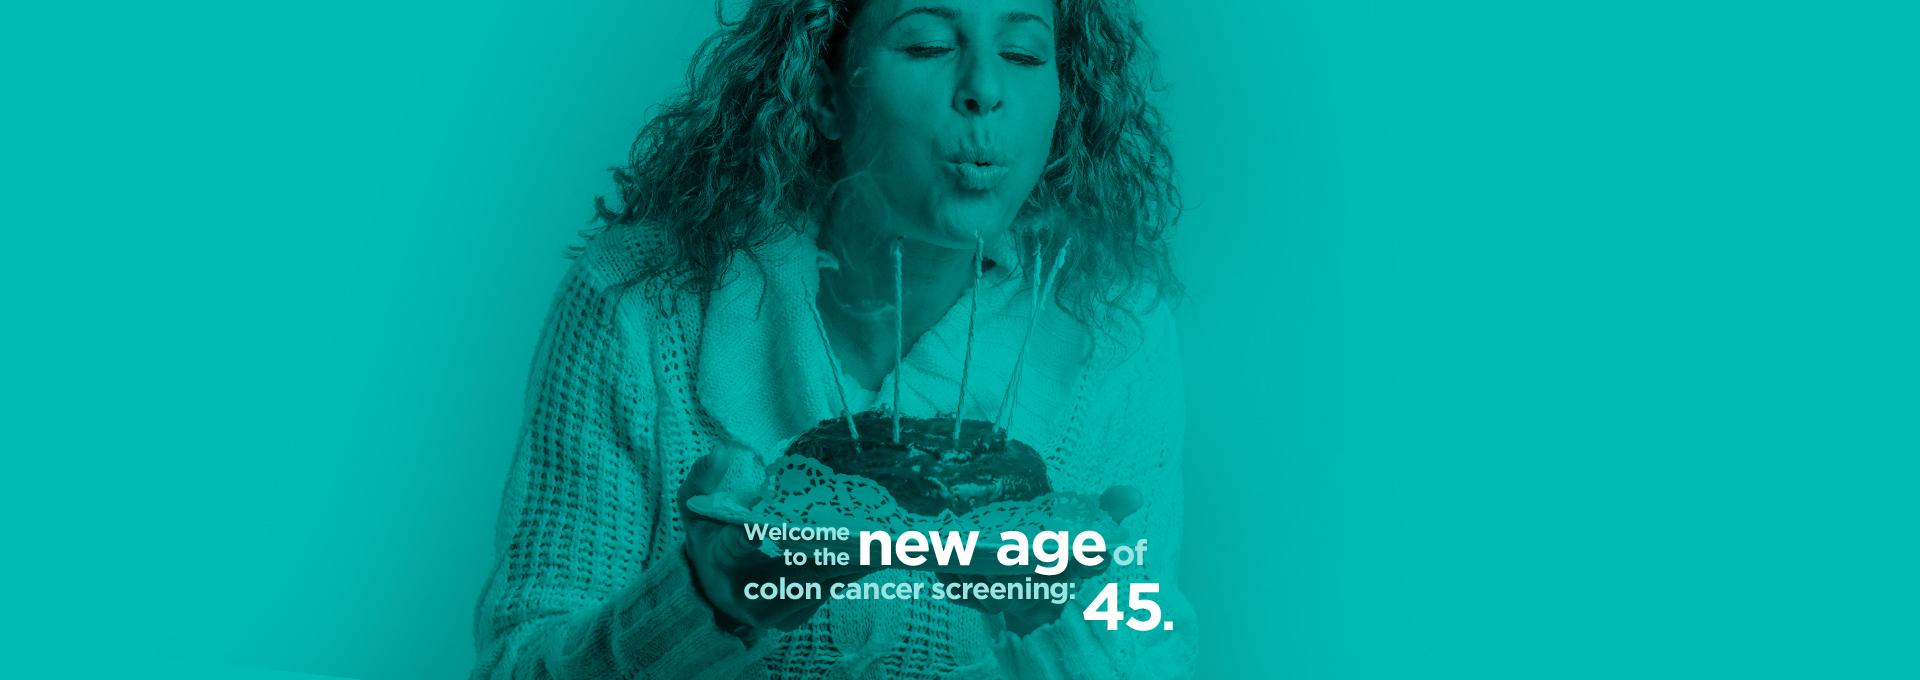 Welcome to the New Age of Colon Cancer Screening 45